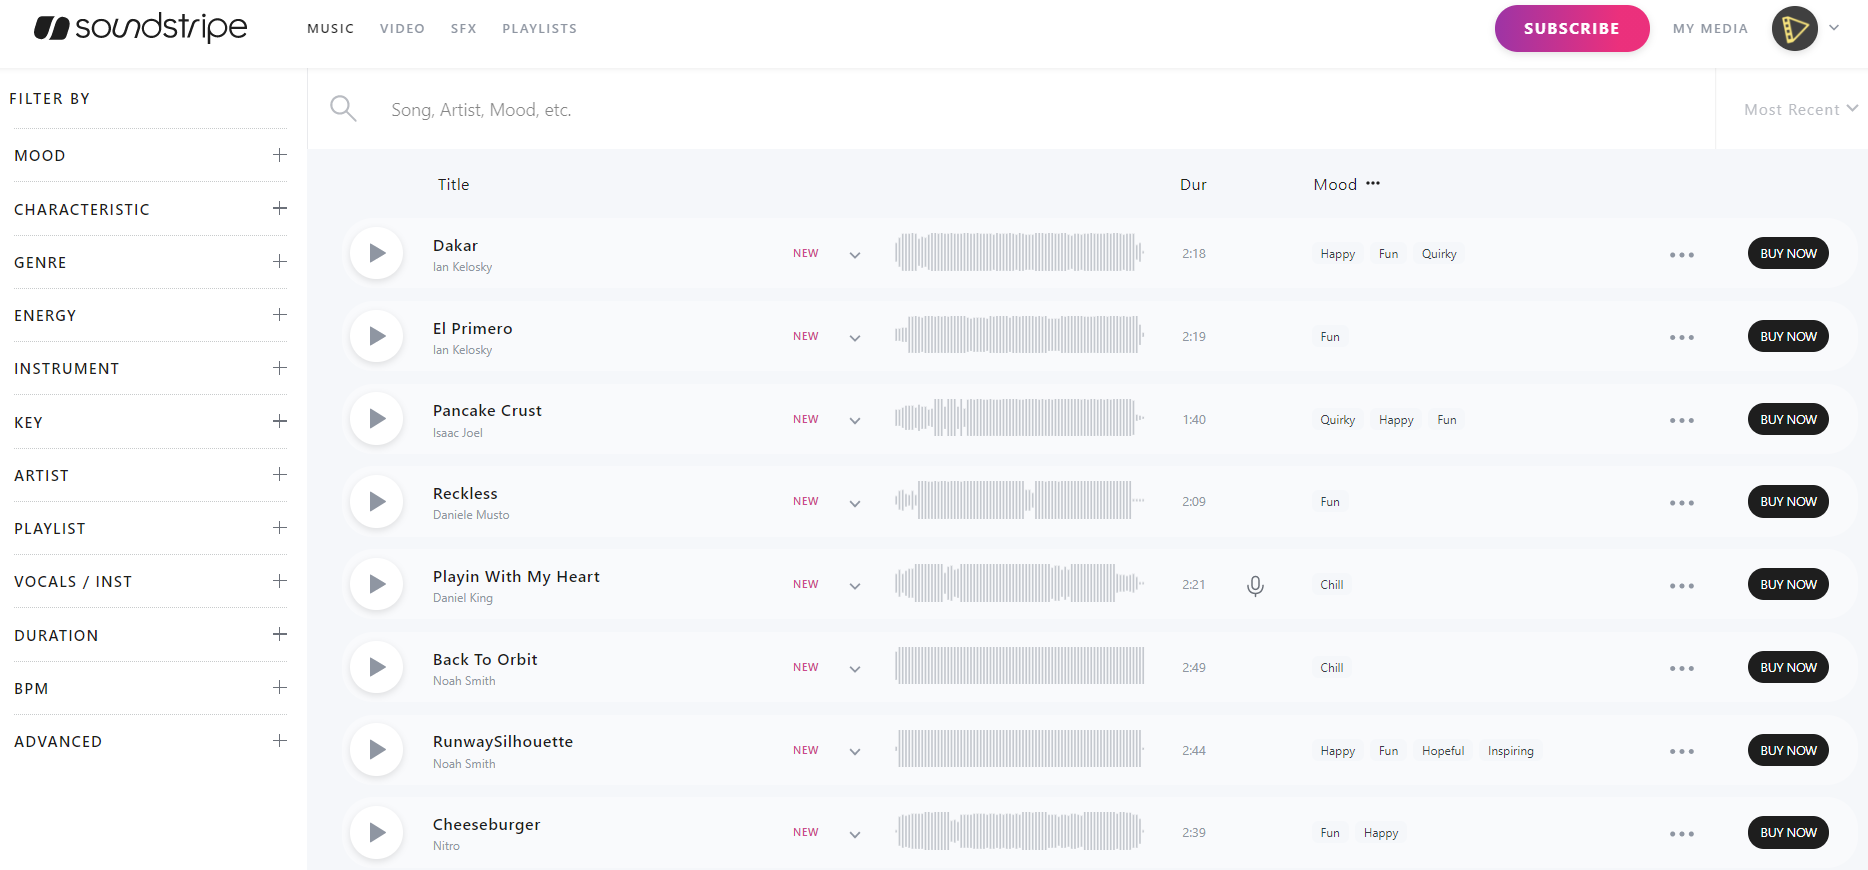 Soundstripe is great place to find good background music for videos. The interface has a well catalogued music items. 